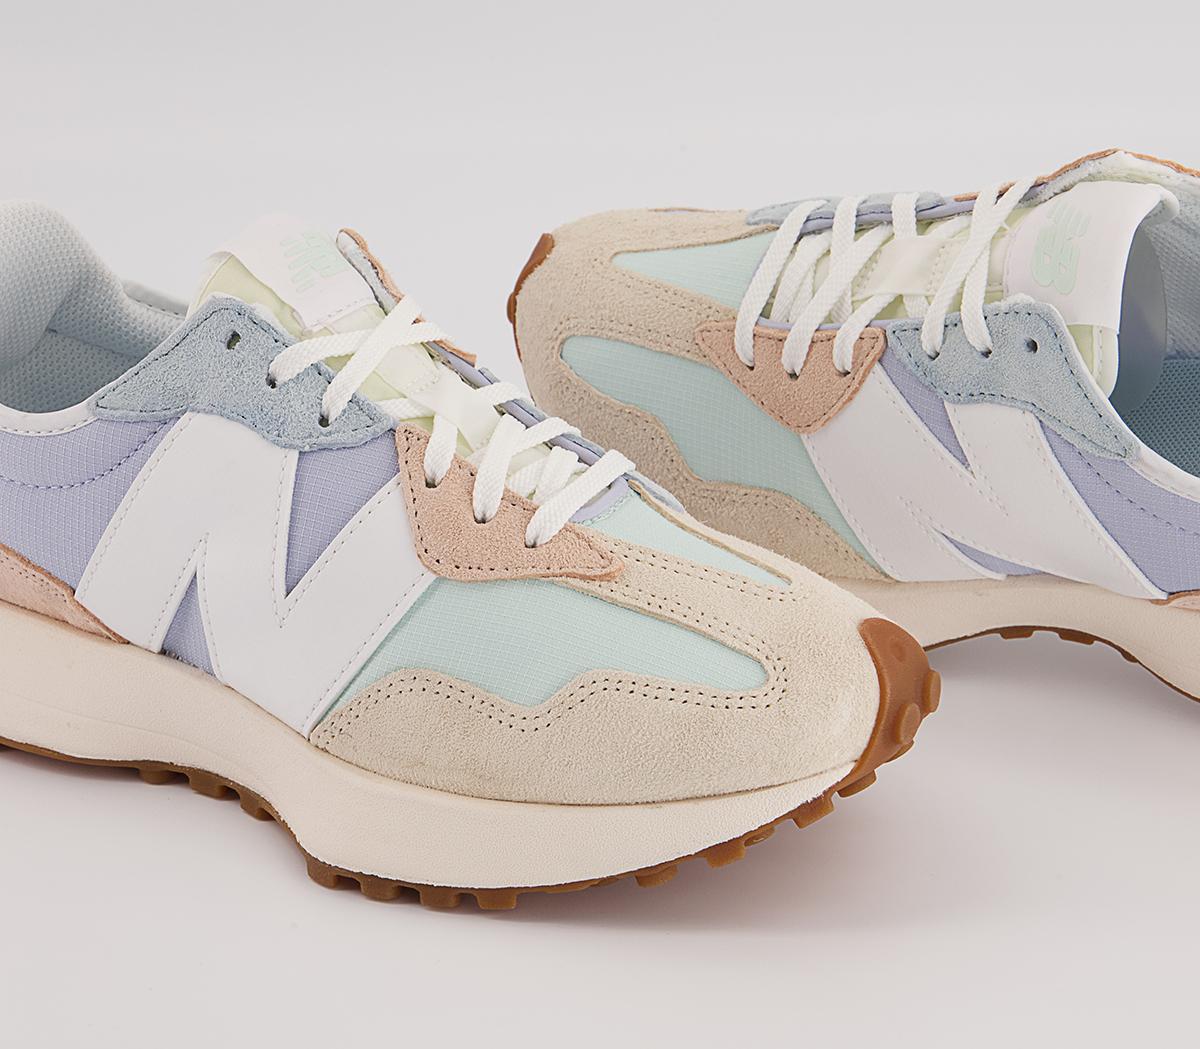 New Balance 327 Trainers Mint Lilac Beige White Gum - Women's Trainers